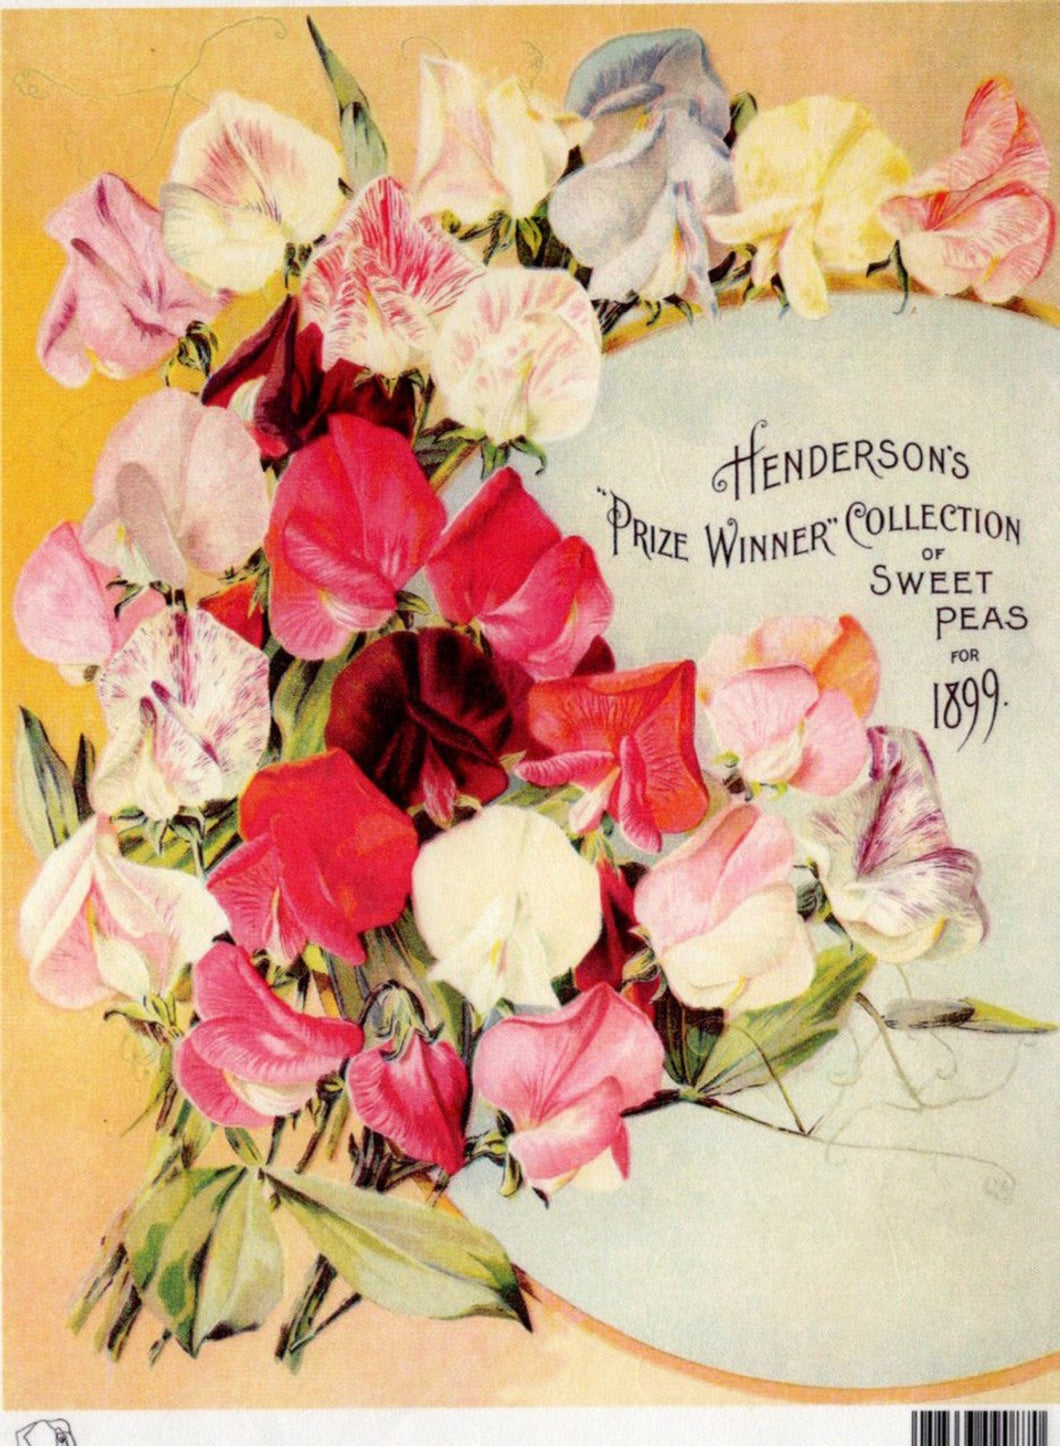 Henderson's Prize Winner Collection of Sweet Peas 1899 Rice Paper by Calambour Italy TT92